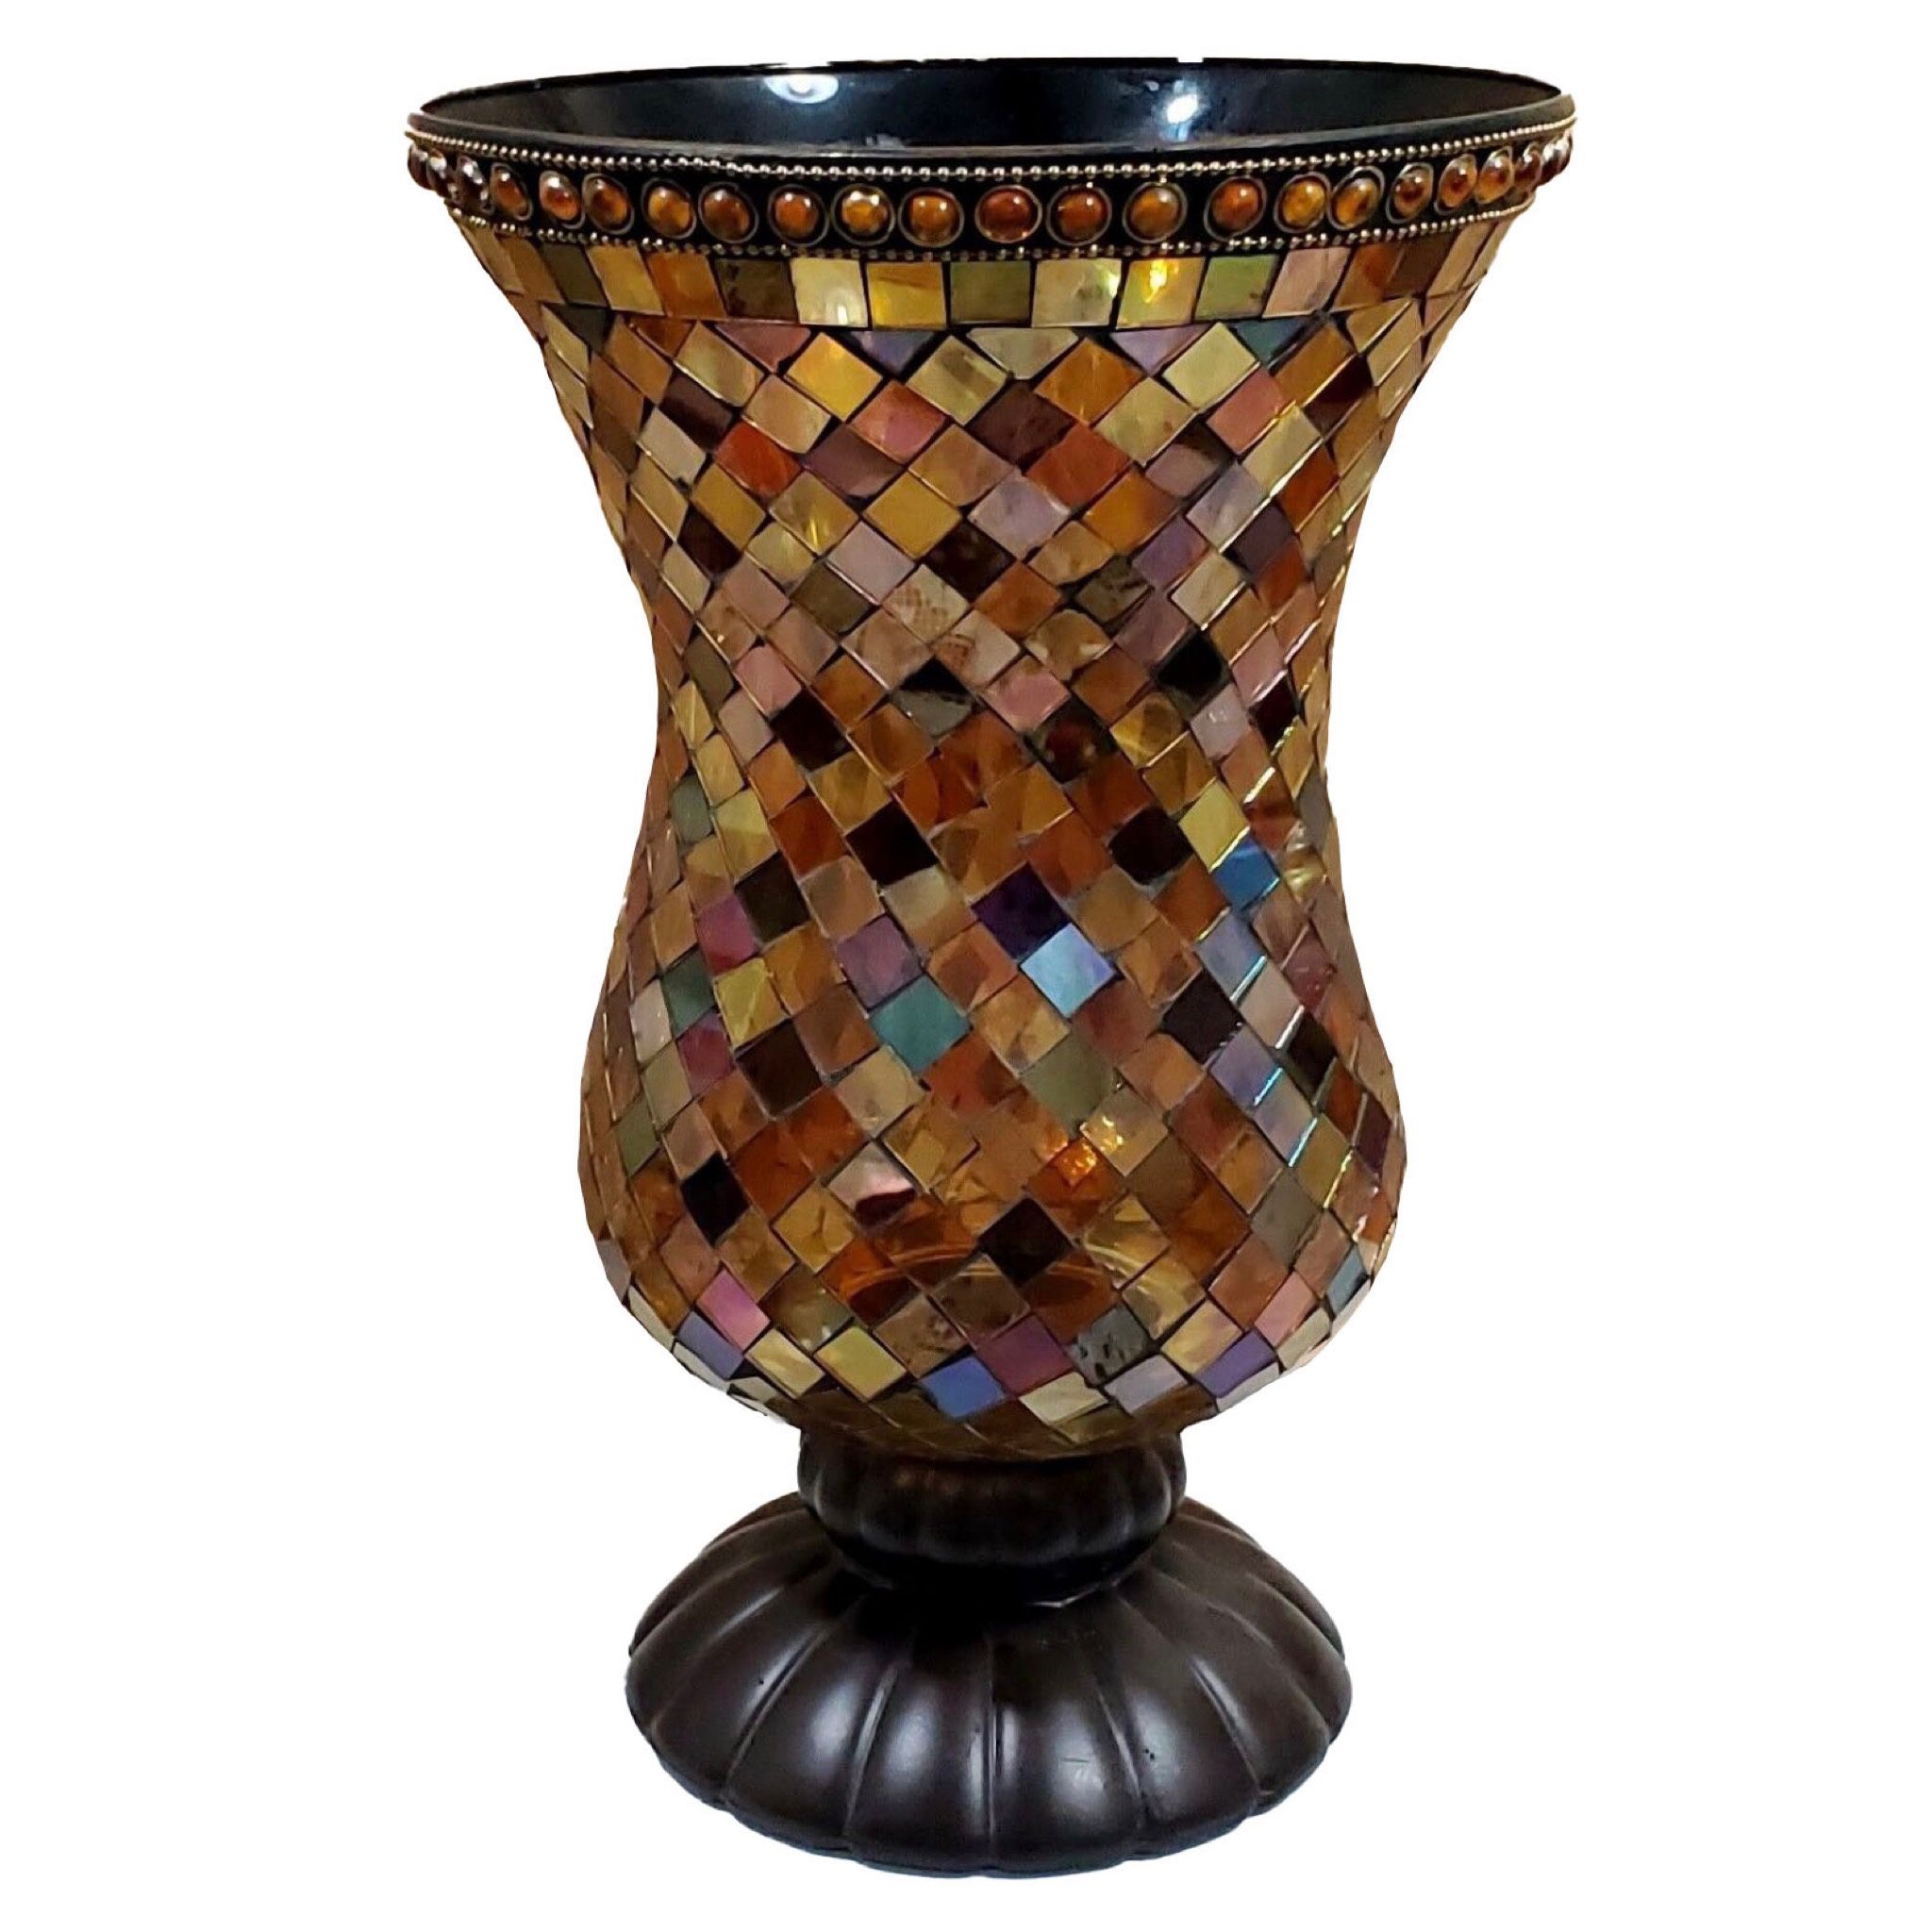 PartyLite Global Fusion Stained Glass Mosaic Hurricane Candle Holder 12"